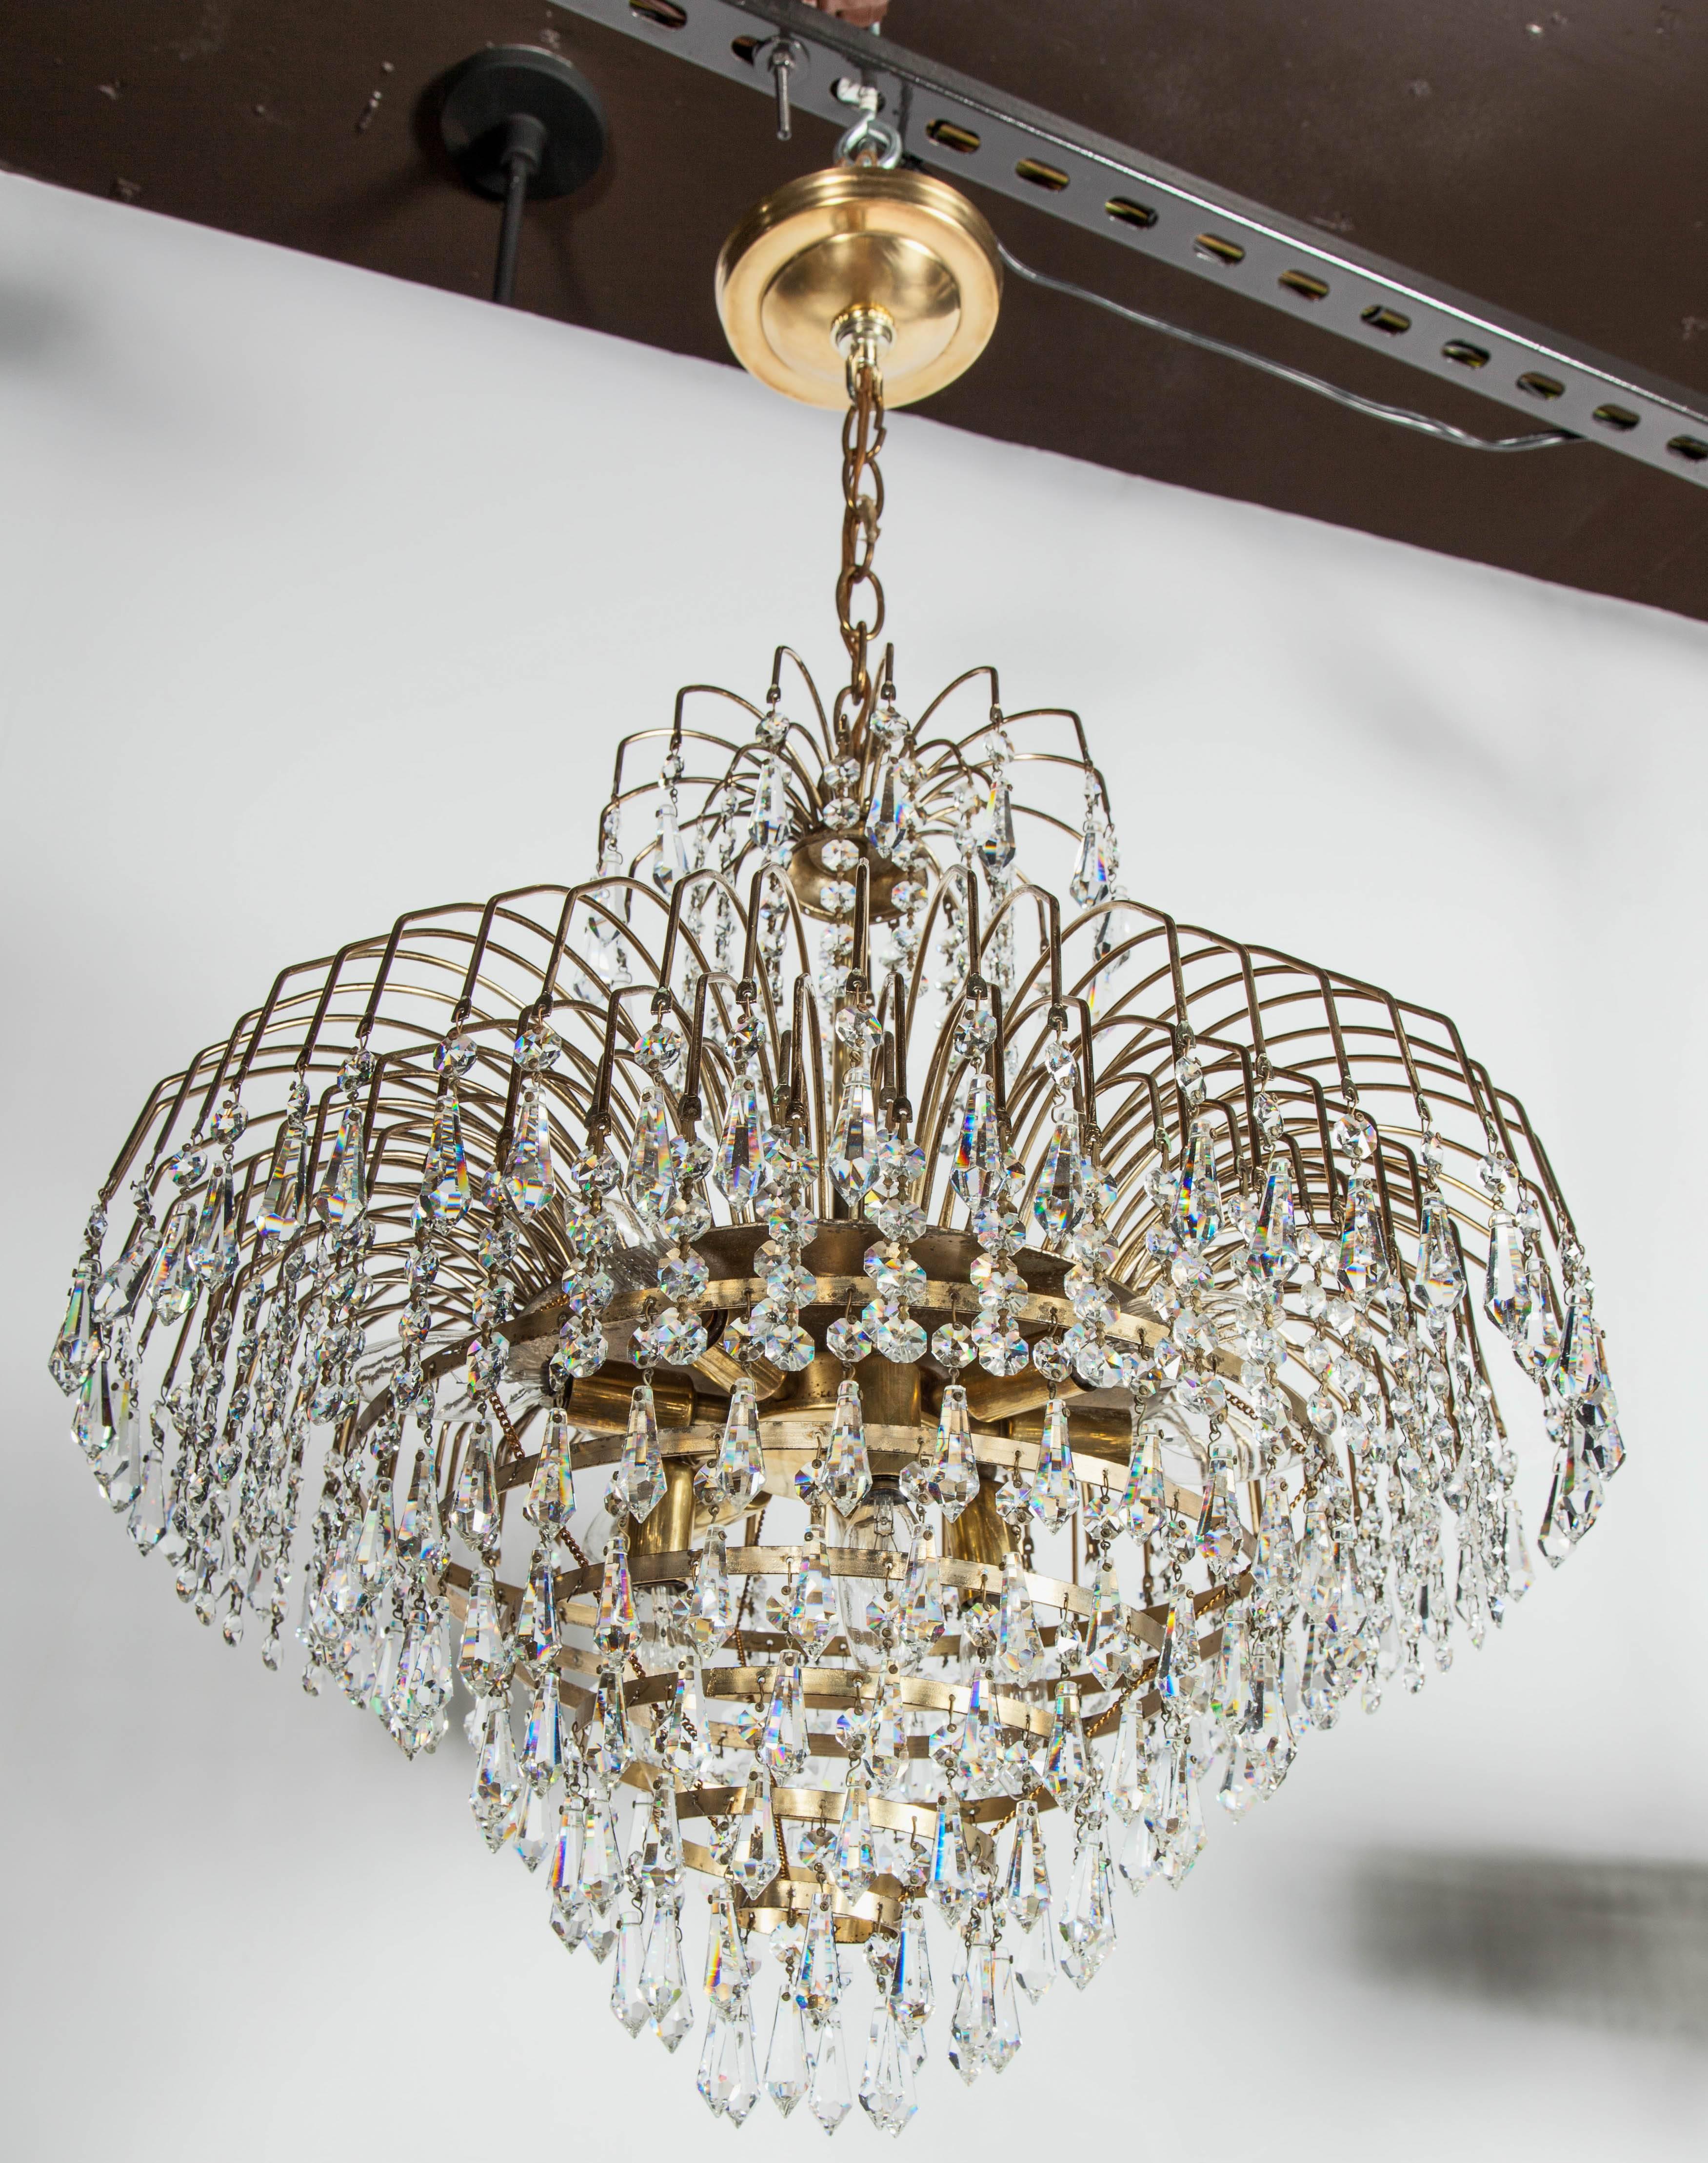 Mid-Century Modern waterfall chandelier with spectacular cut crystals throughout. Features a brass frame with multiple cascading tiers, fitted with hundreds of suspended cut crystal pendants and crystal beads. The frame is comprised of ten-tier in